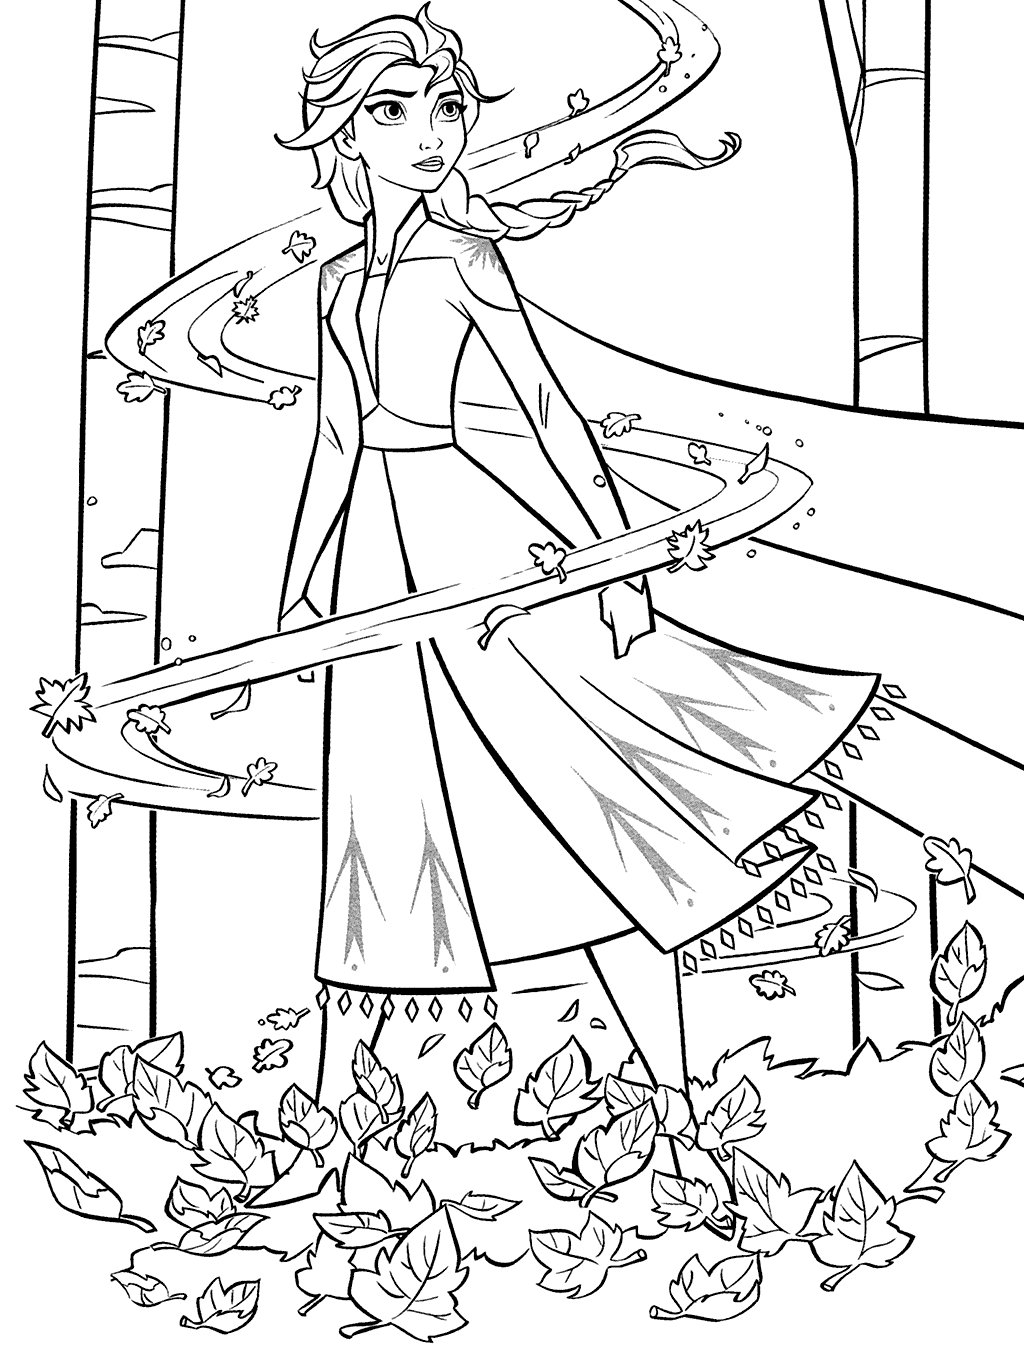 Elsa Changes The Weather Coloring Pages   Coloring Cool